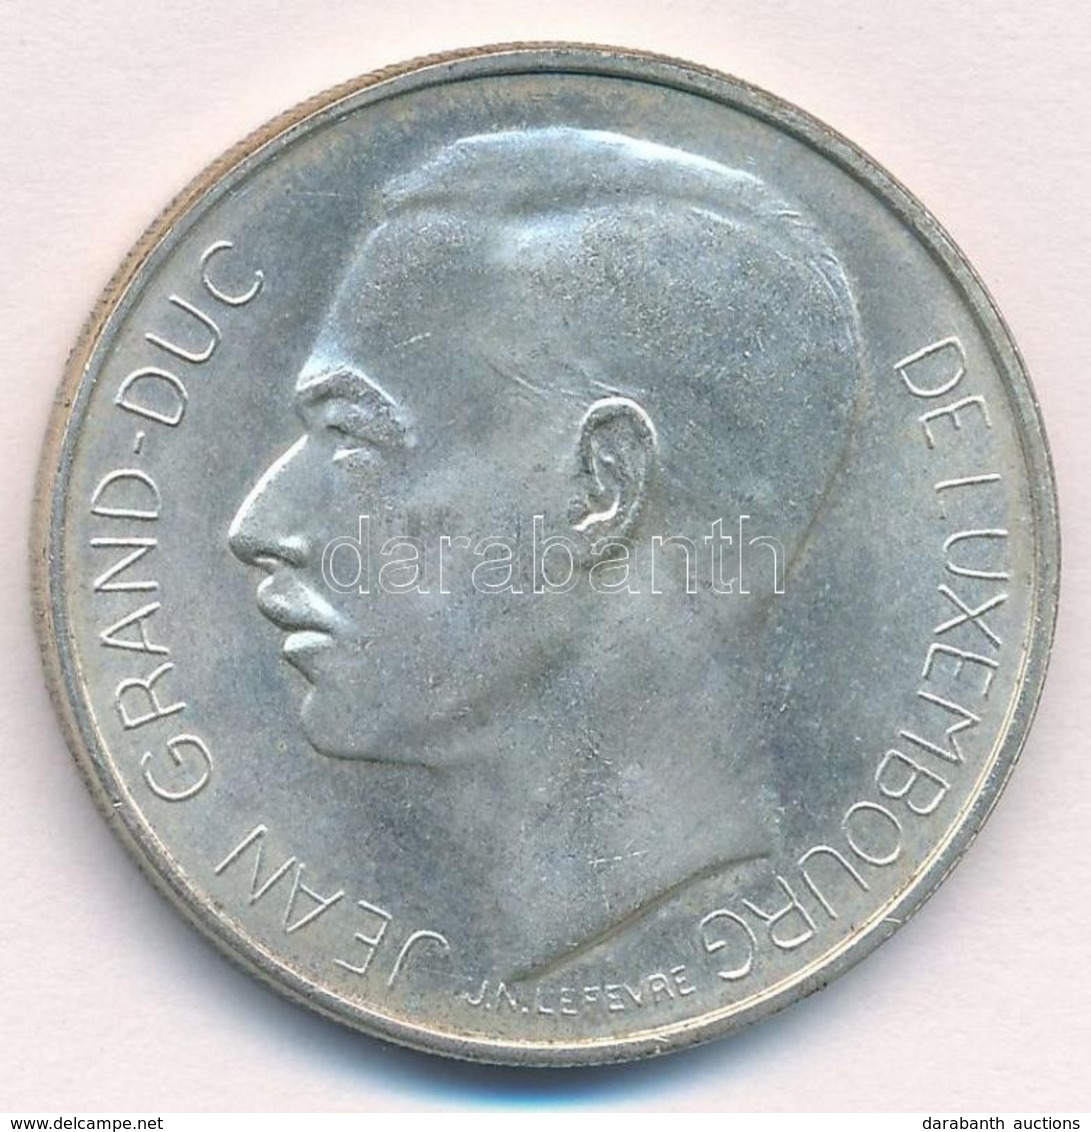 Luxemburg 1964. 100Fr Ag 'Jean' T:1-
Luxembourg 1964. 100 Francs Ag 'Jean' C:AU 
Krause KM#54 - Unclassified